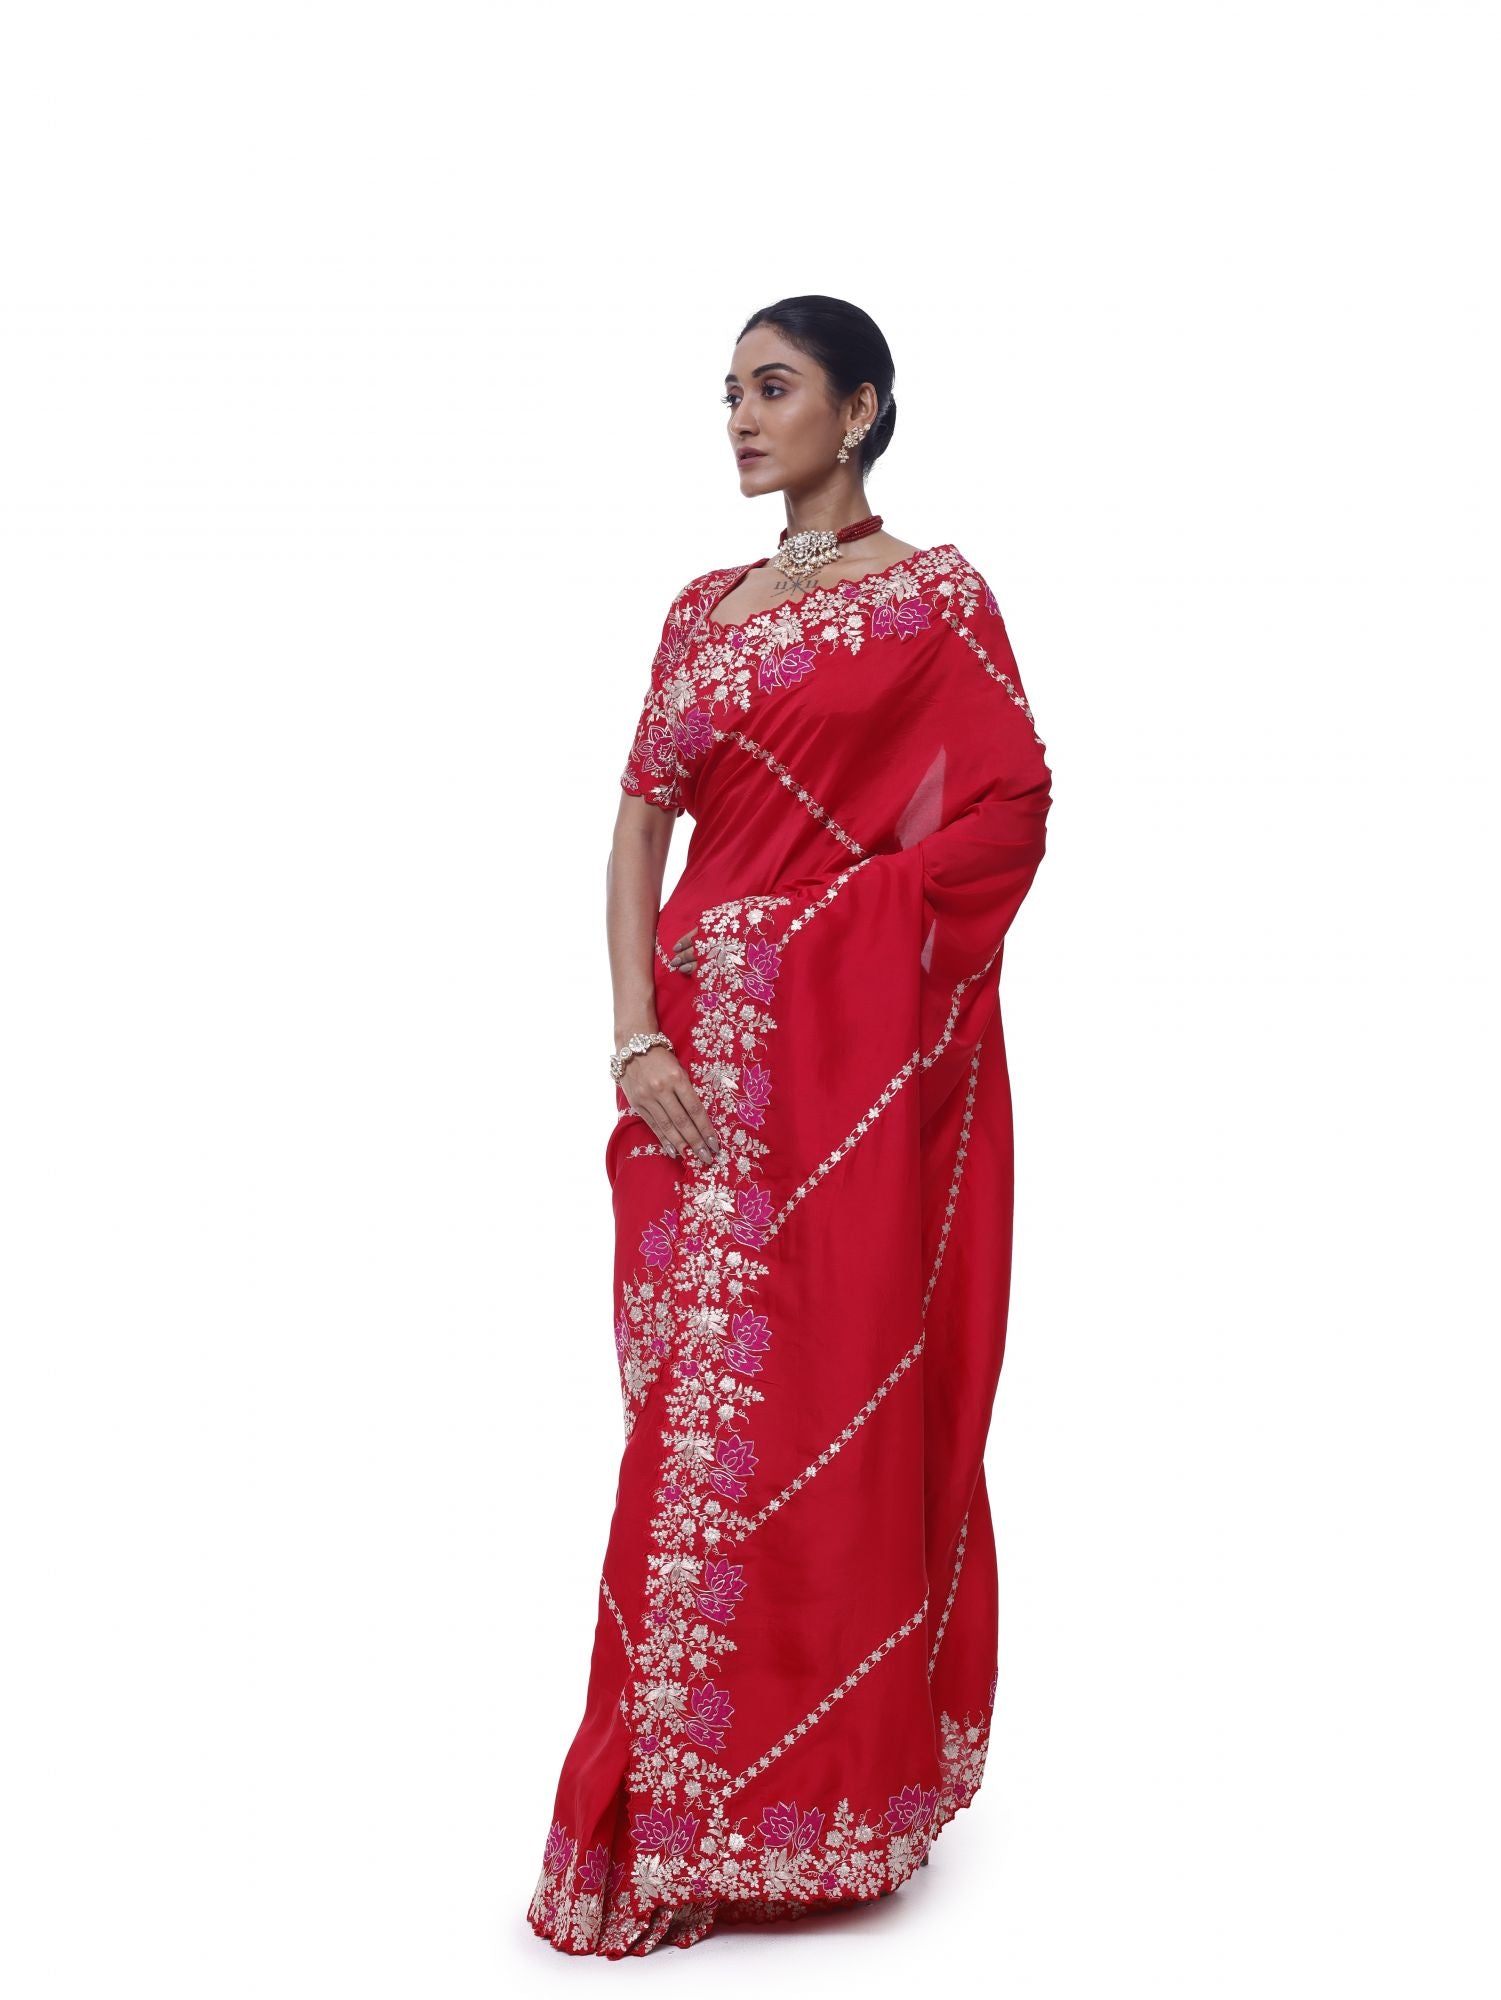 Buy crimson red zari handloom silk saree online in USA with blouse. Look your best at parties and weddings in beautiful designer sarees, embroidered sarees, handwoven sarees, silk sarees, organza saris from Pure Elegance Indian saree store in USA.-pallu